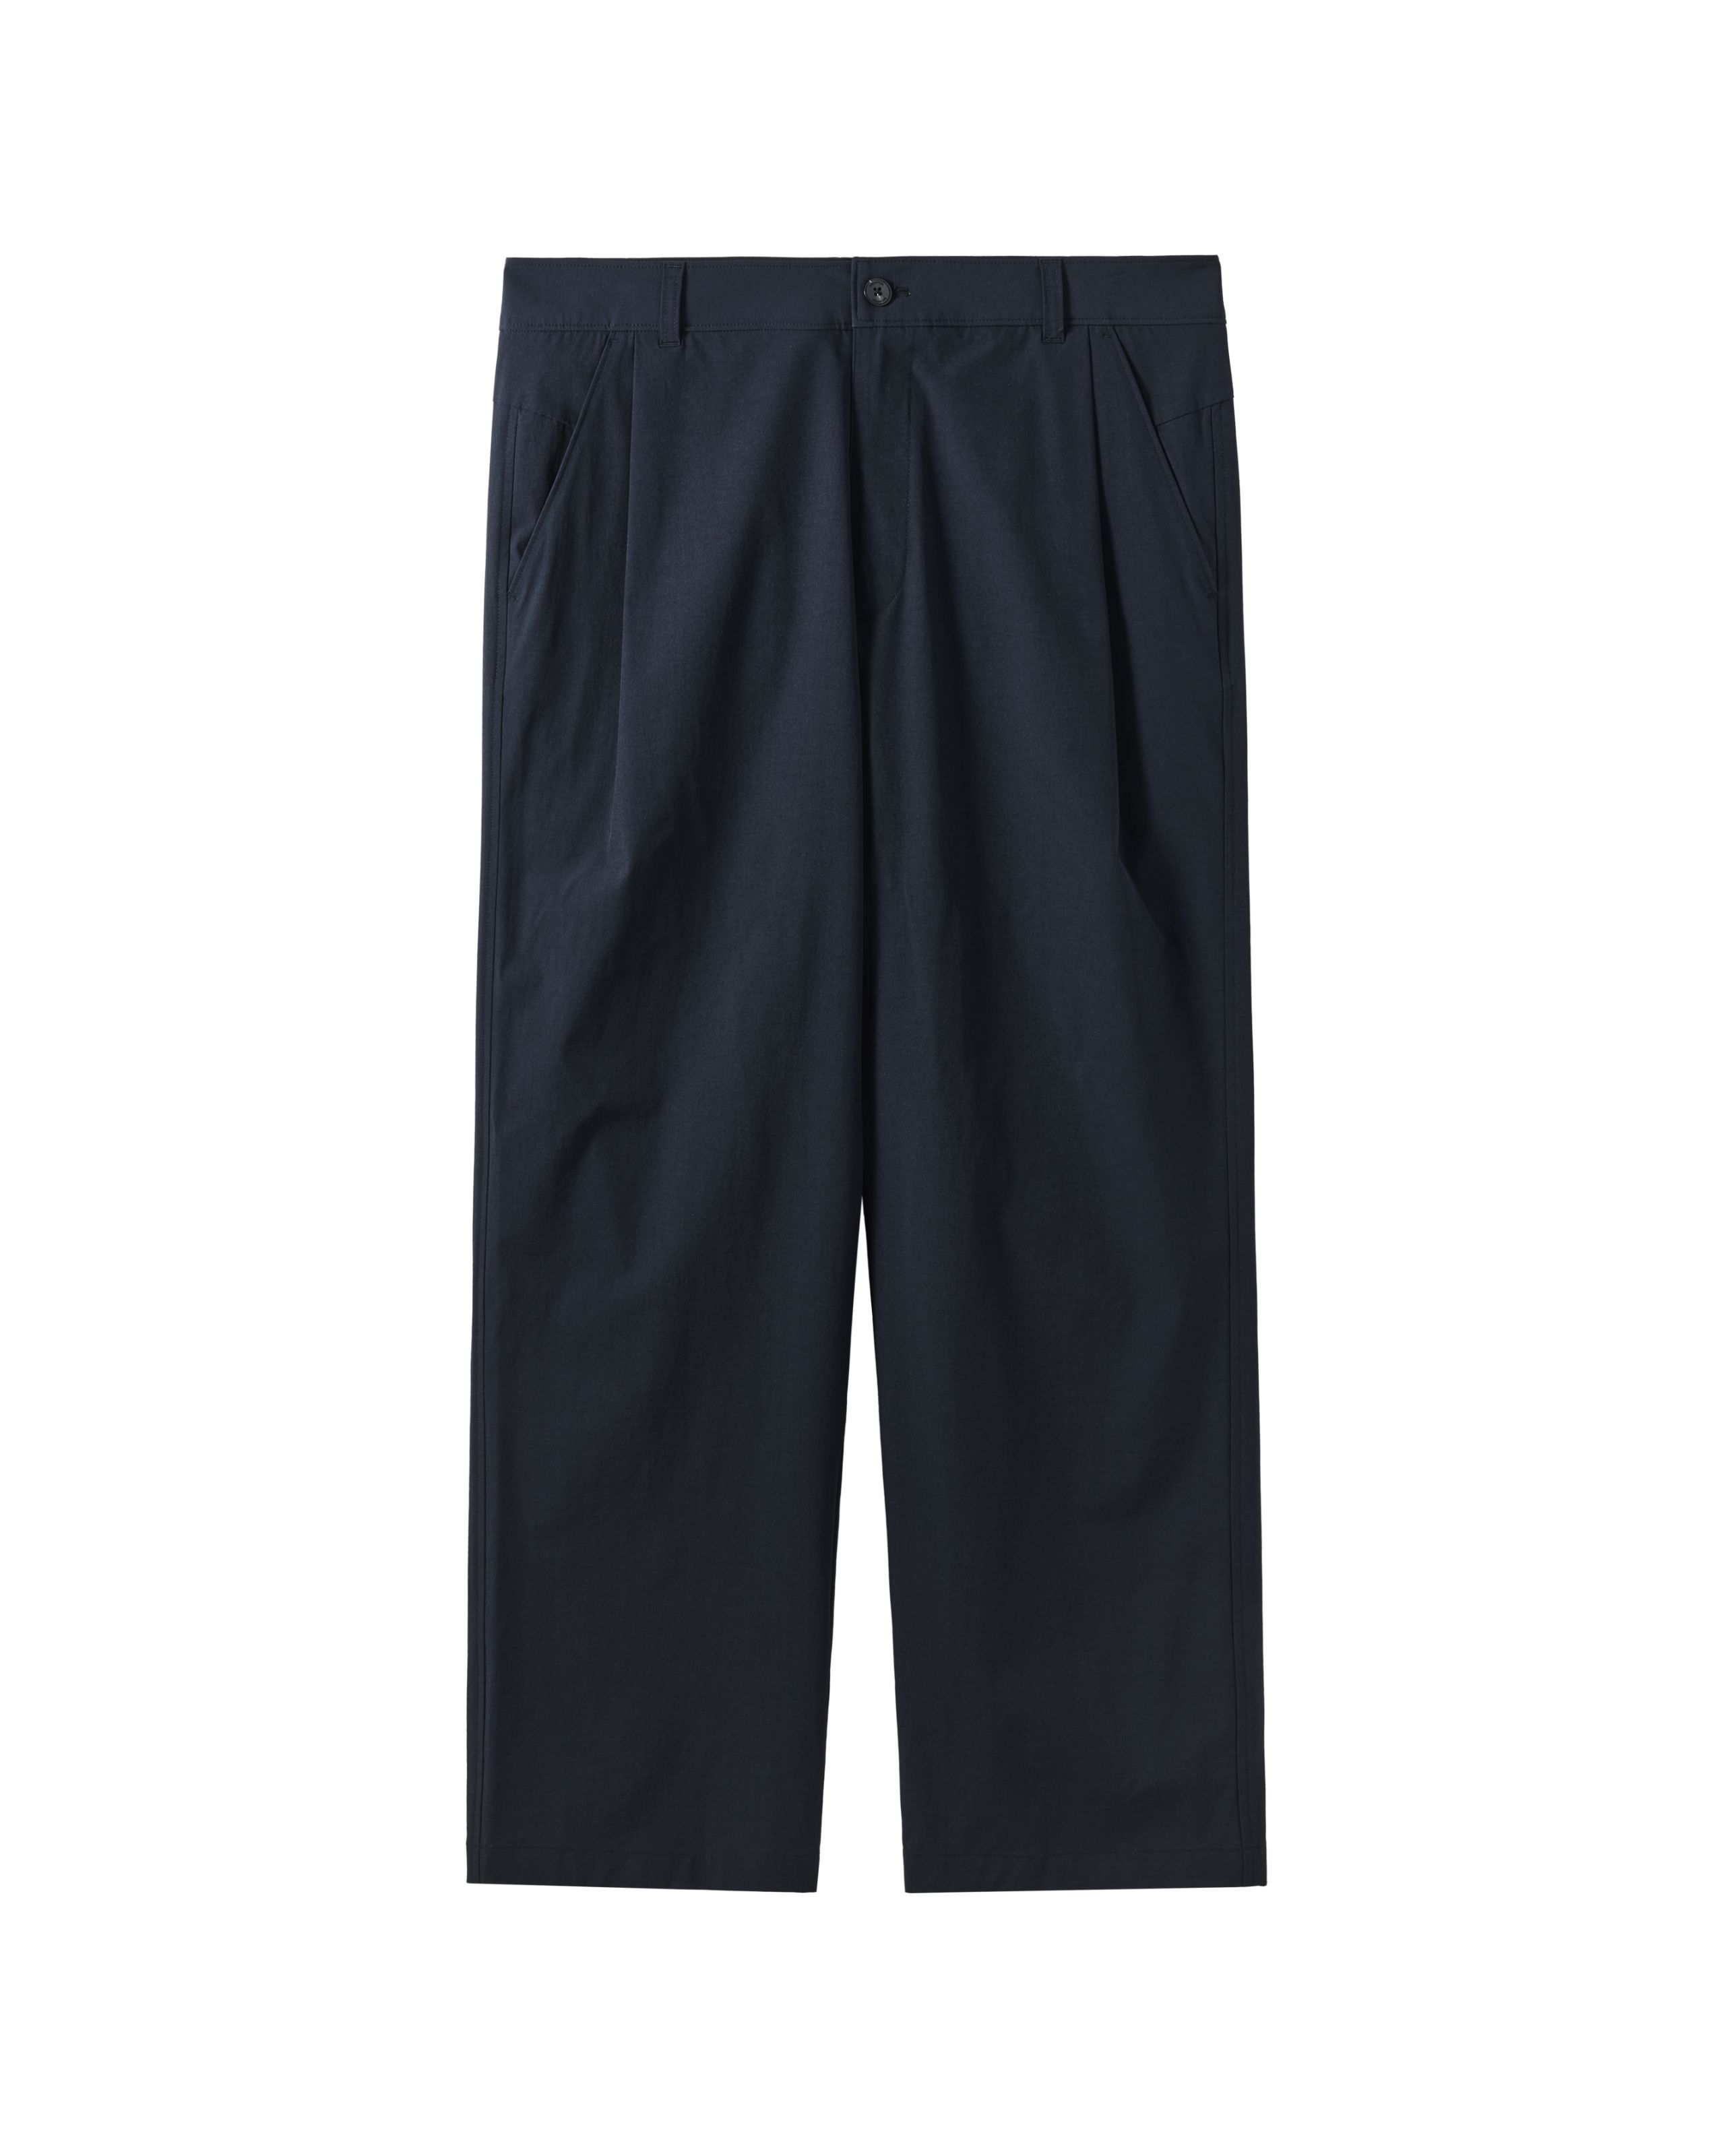 CASUAL SET TROUSERS - NAVY